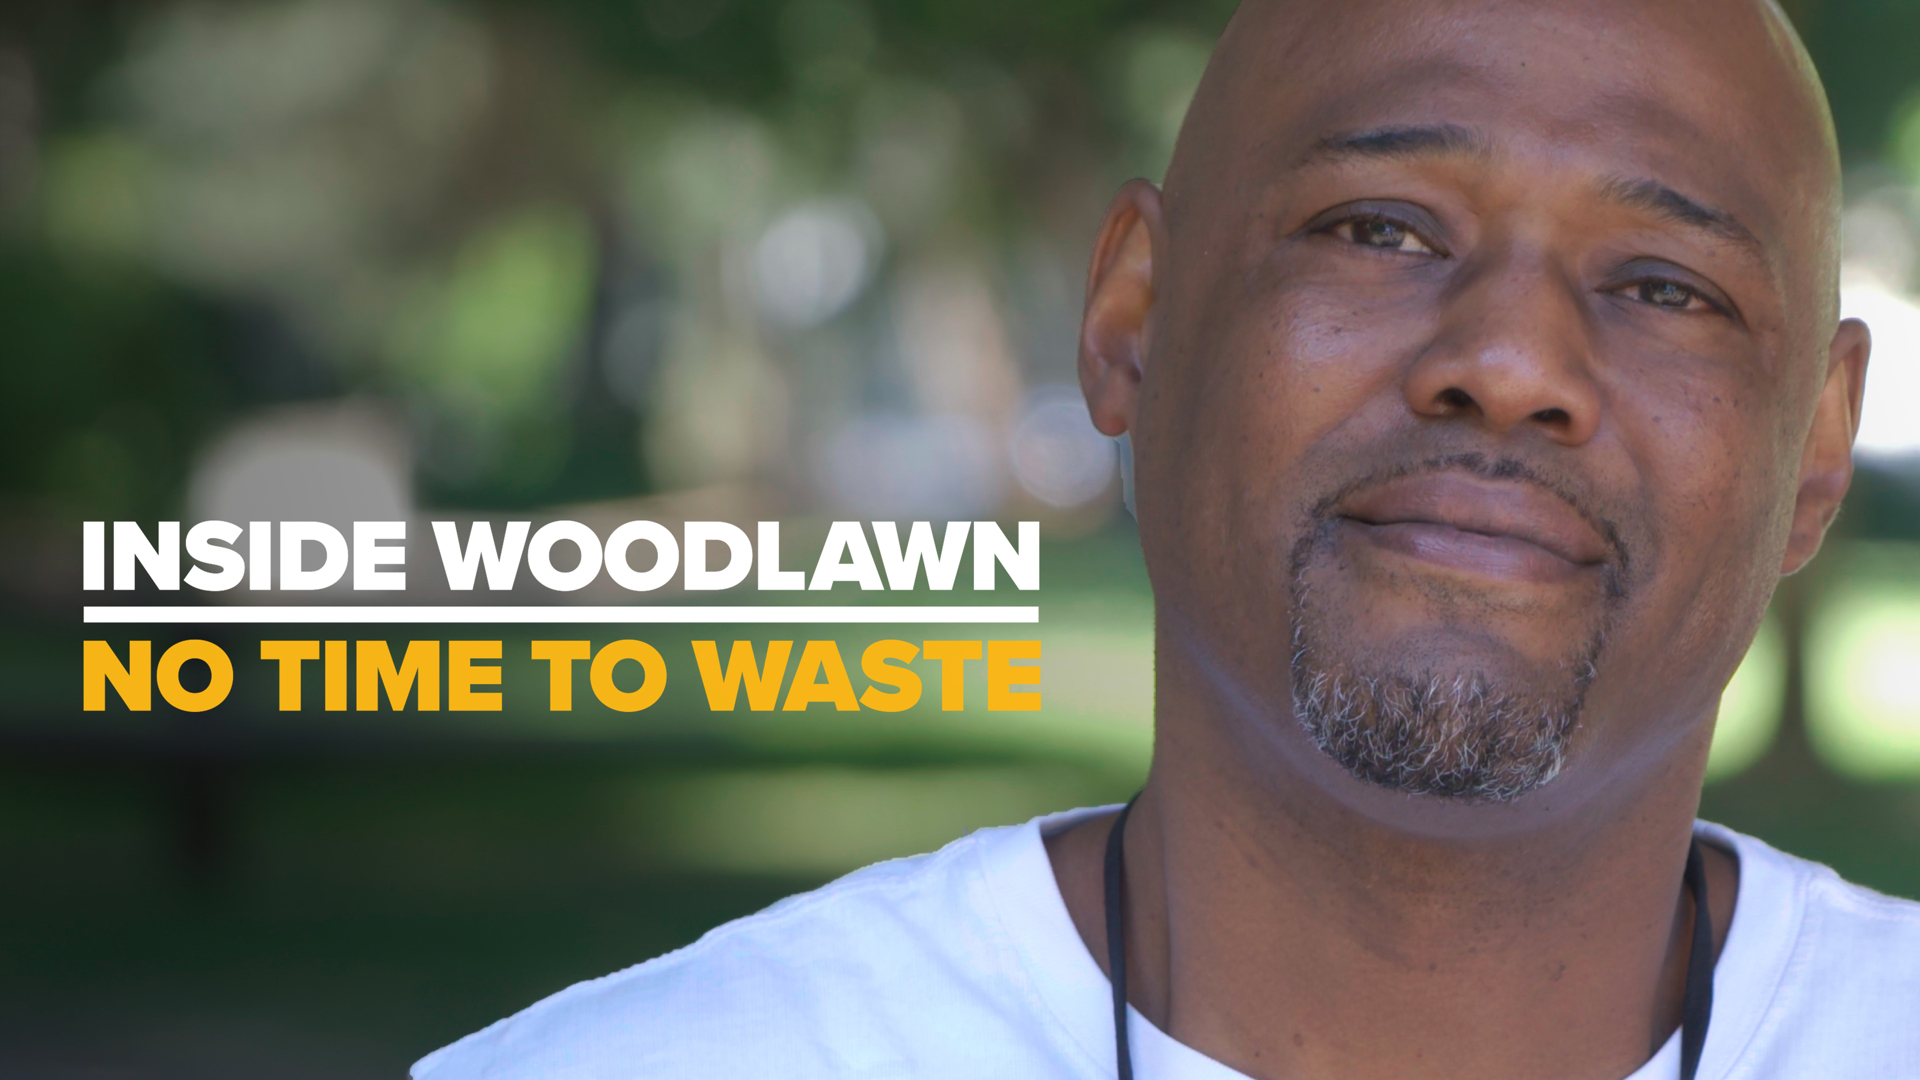 Lowrey, a first-grade teacher at Woodlawn Elementary School, talks about the importance of talking about race and what’s happening in the world with his students.